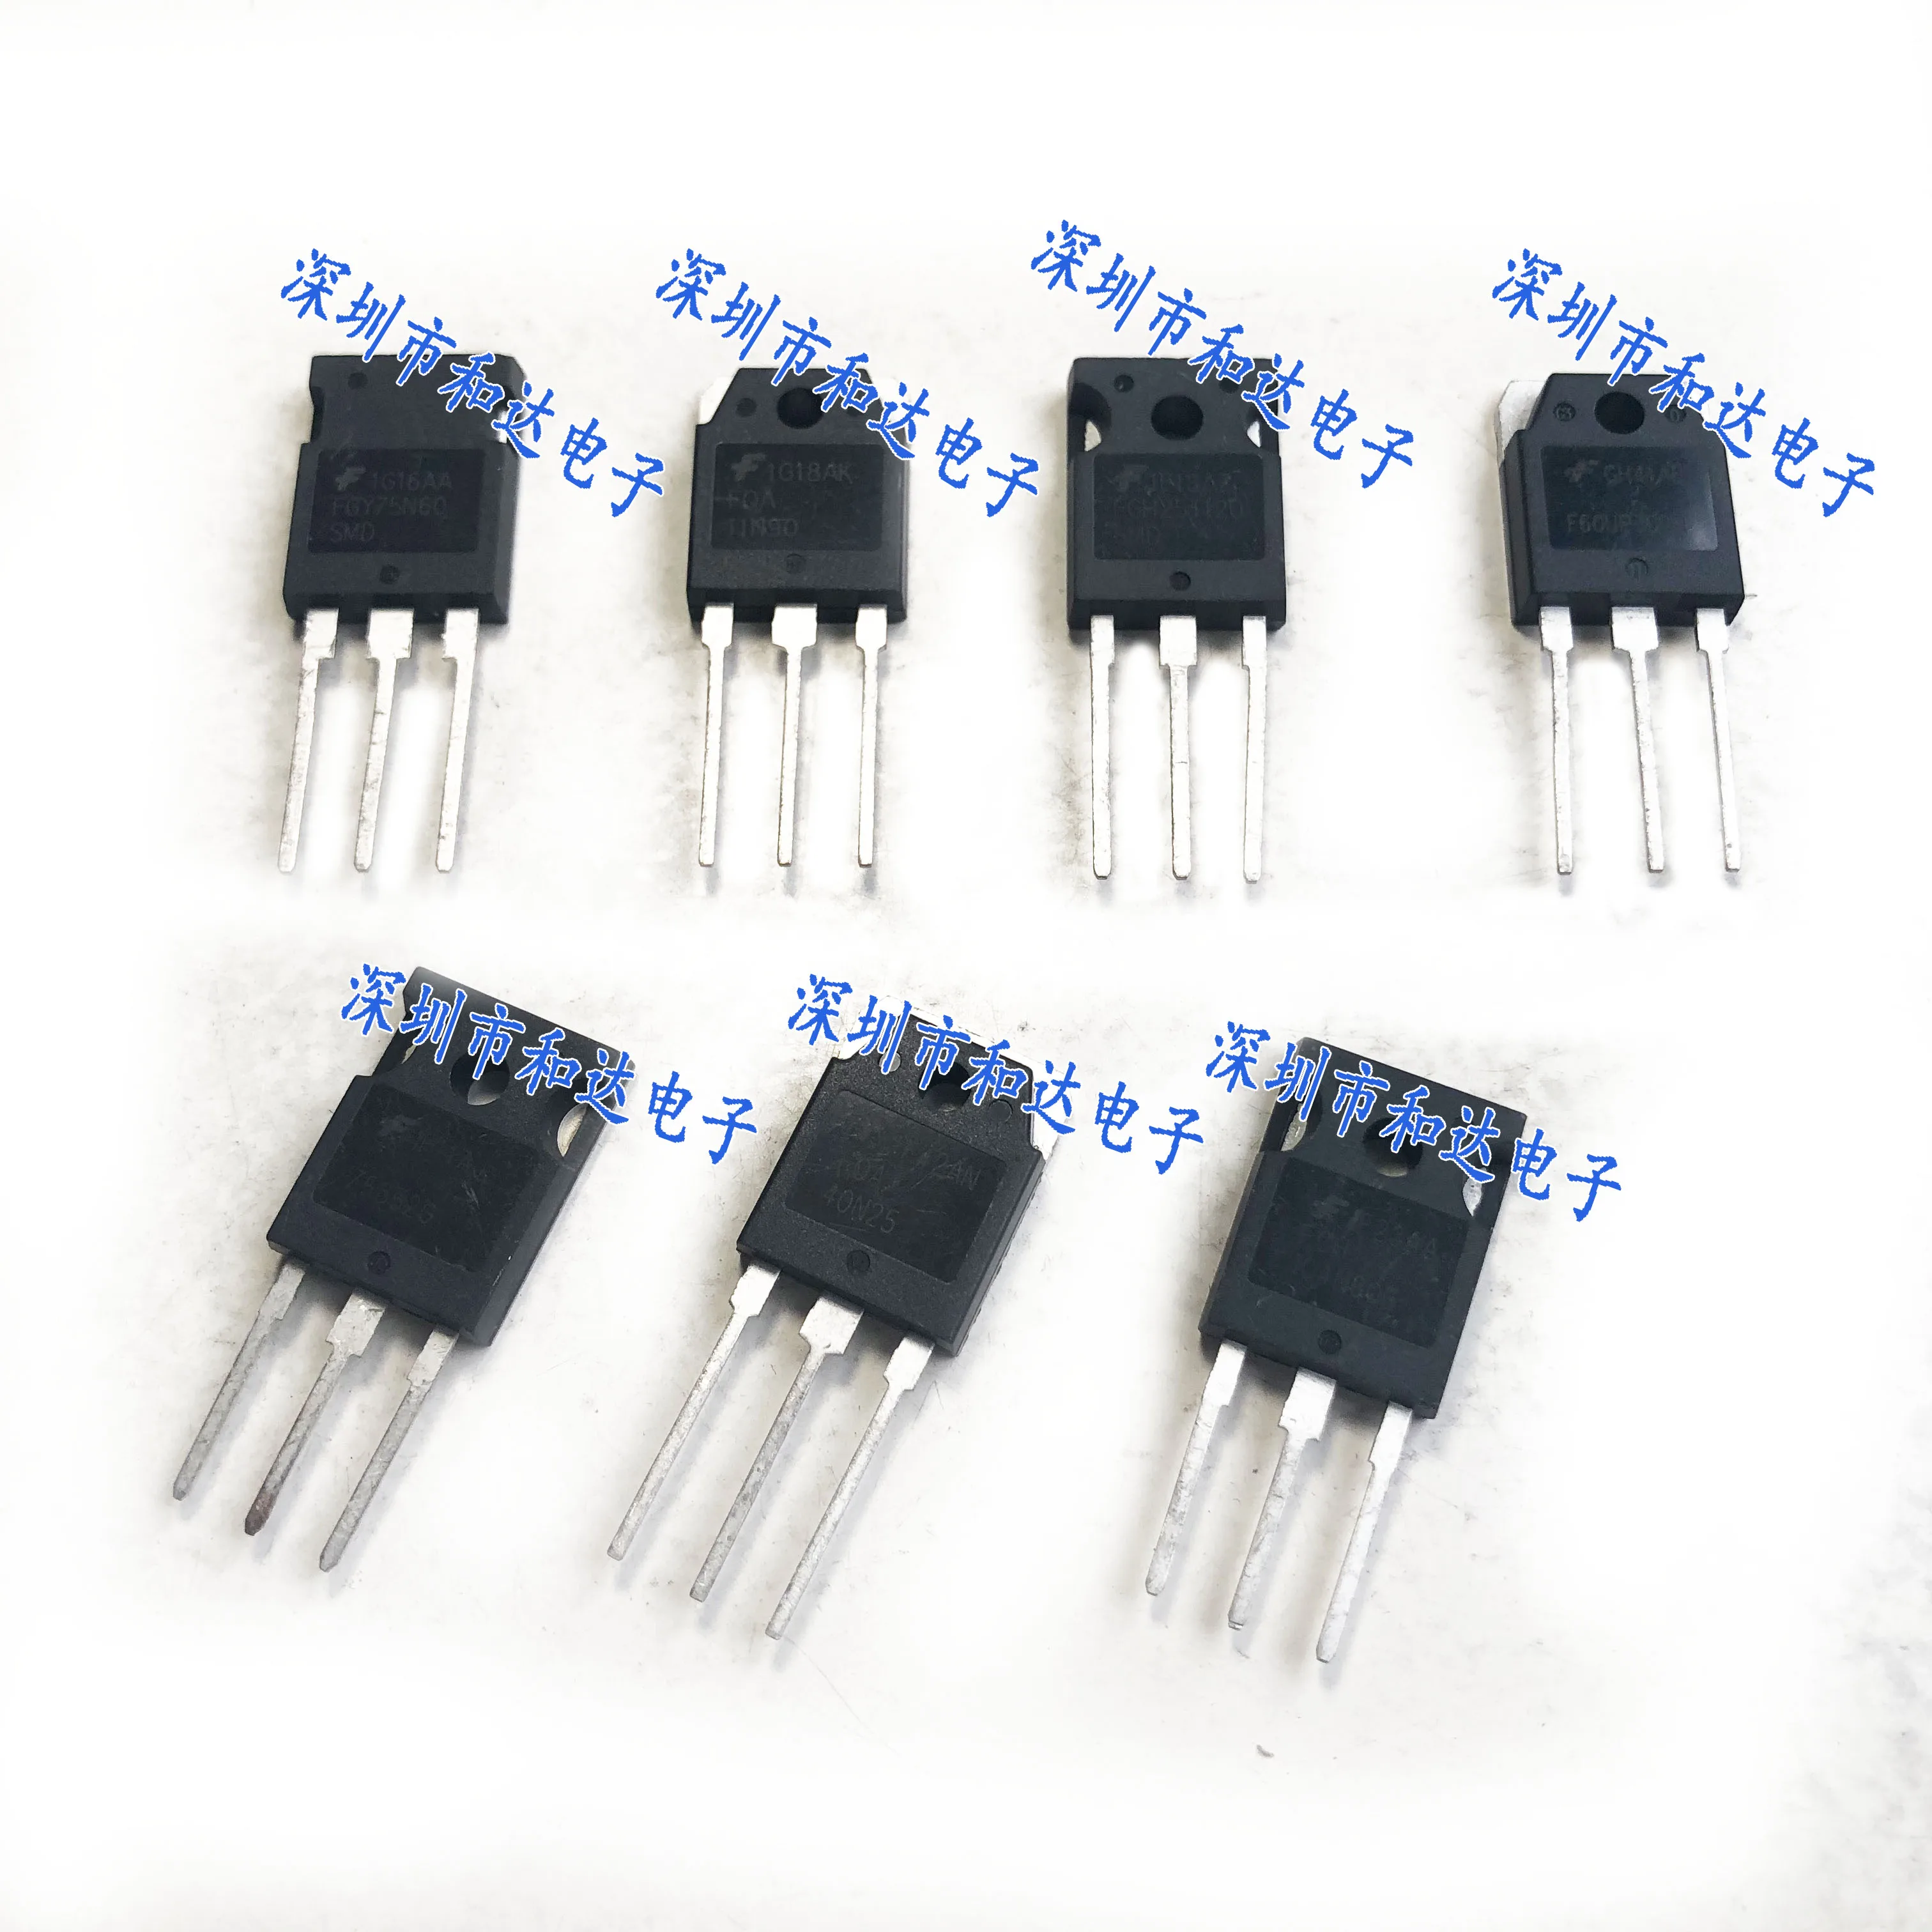 5PCS-10PCS SSP5N80 MOS TO-220 800V 5A NEW AND ORIGINAL ON STOCK